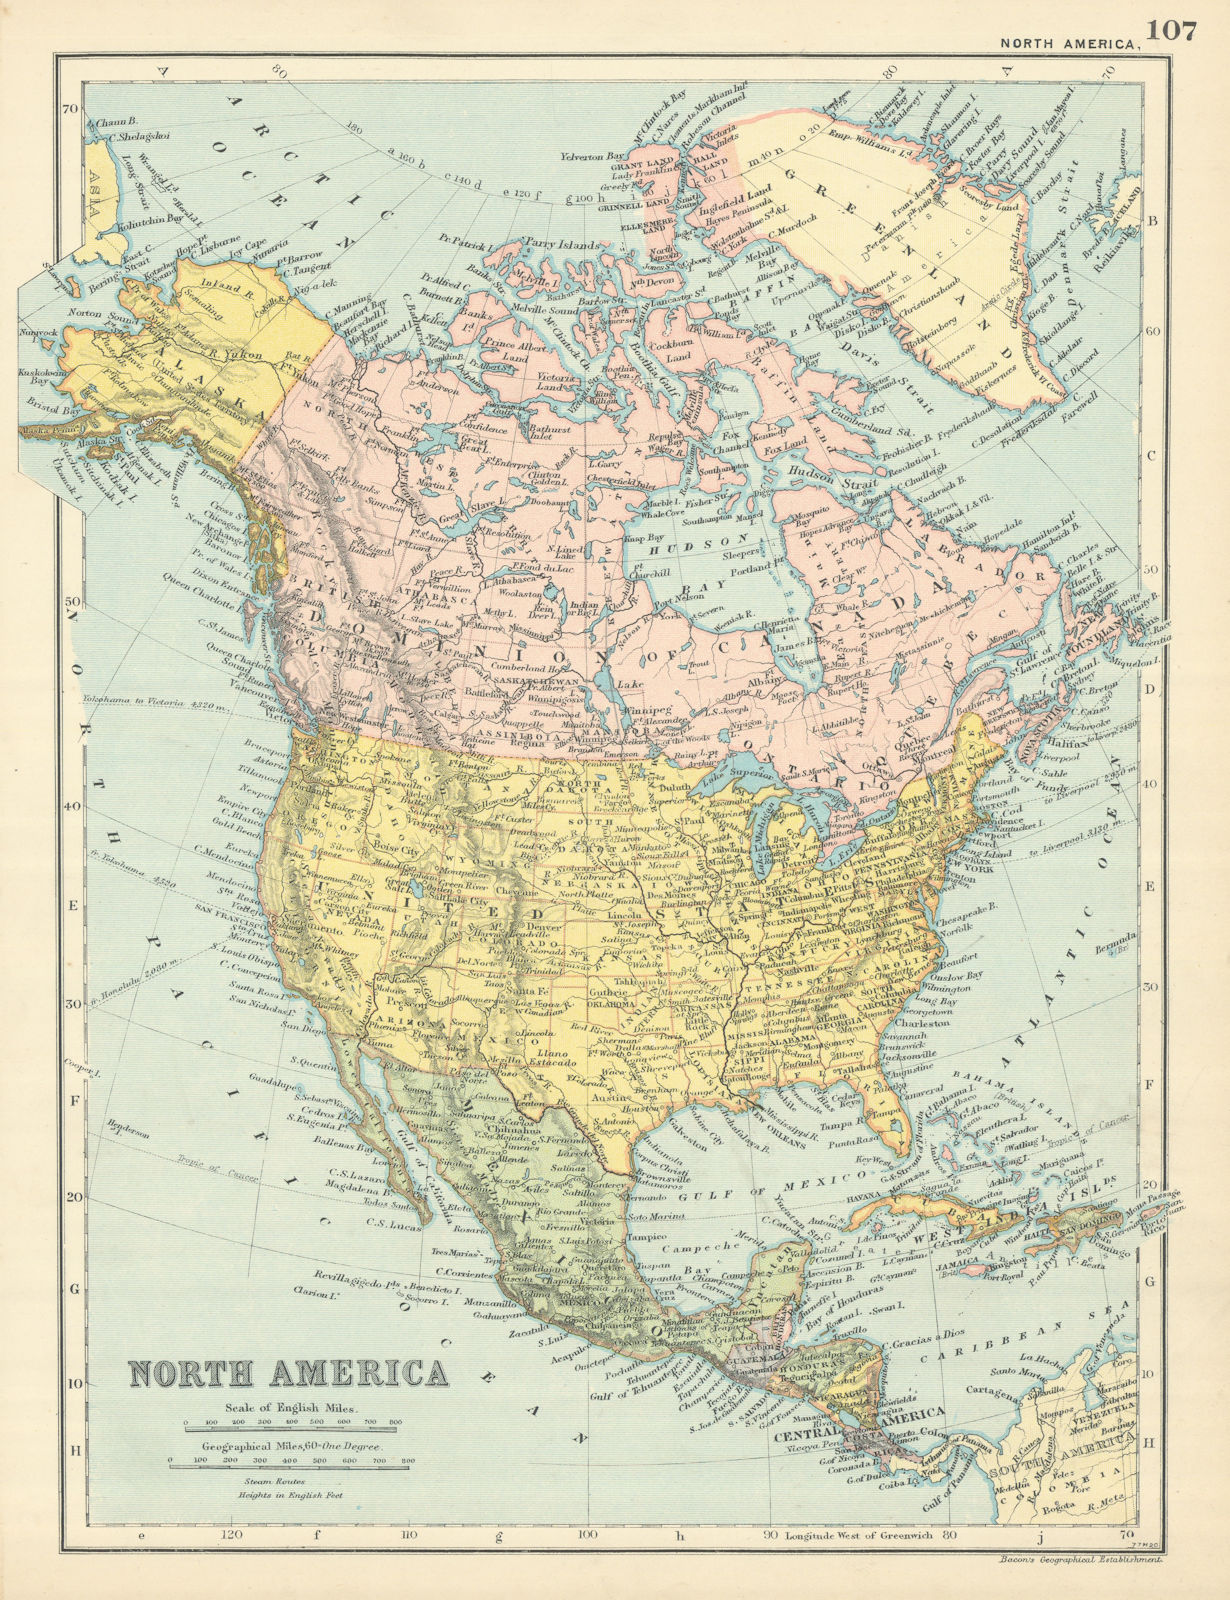 NORTH AMERICA Canada USA Mexico Central America West Indies by GW BACON 1898 map